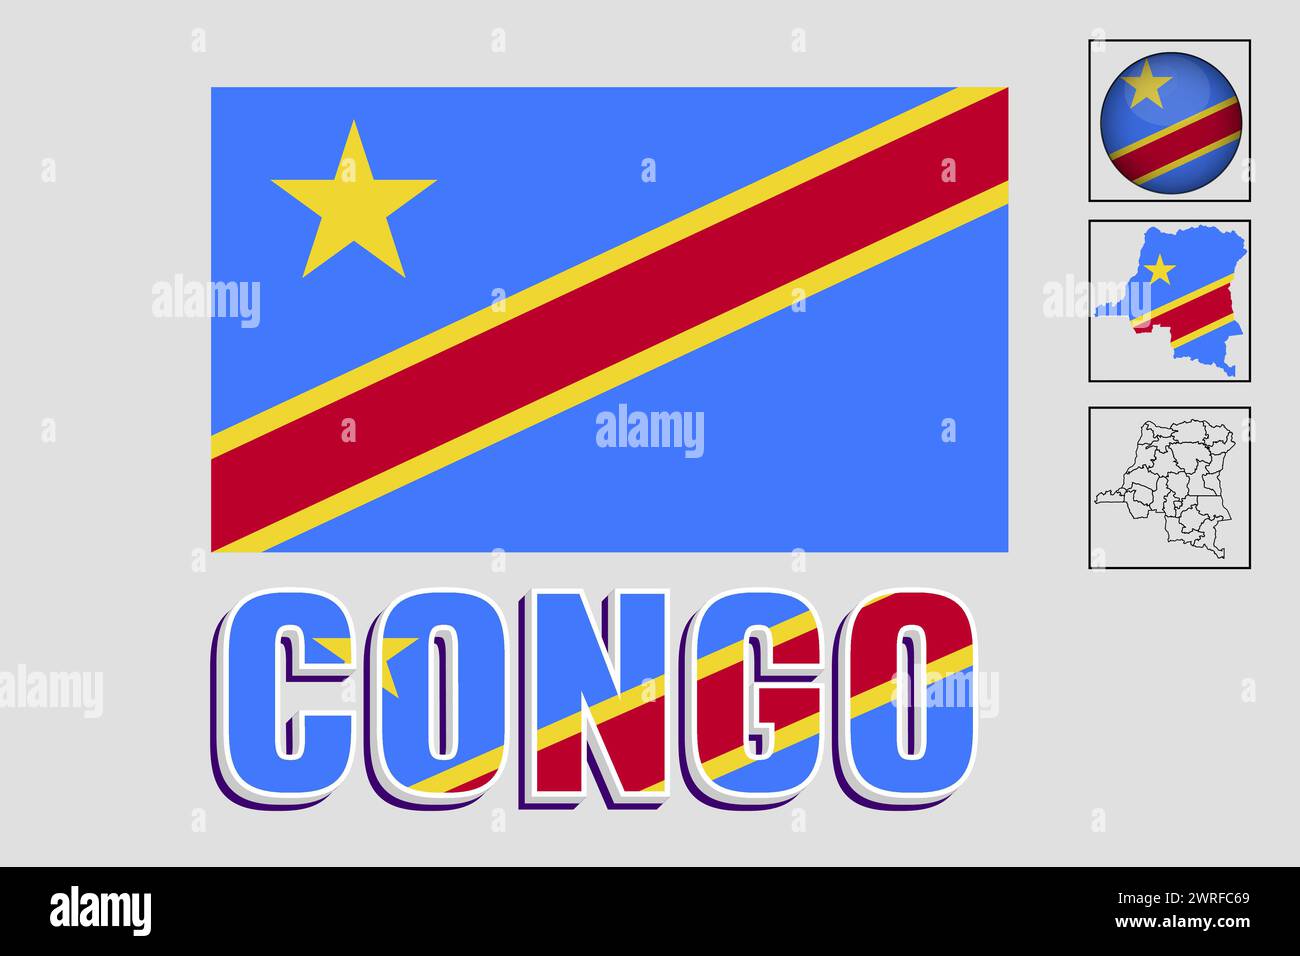 Congo flag and map in vector illustration Stock Vector